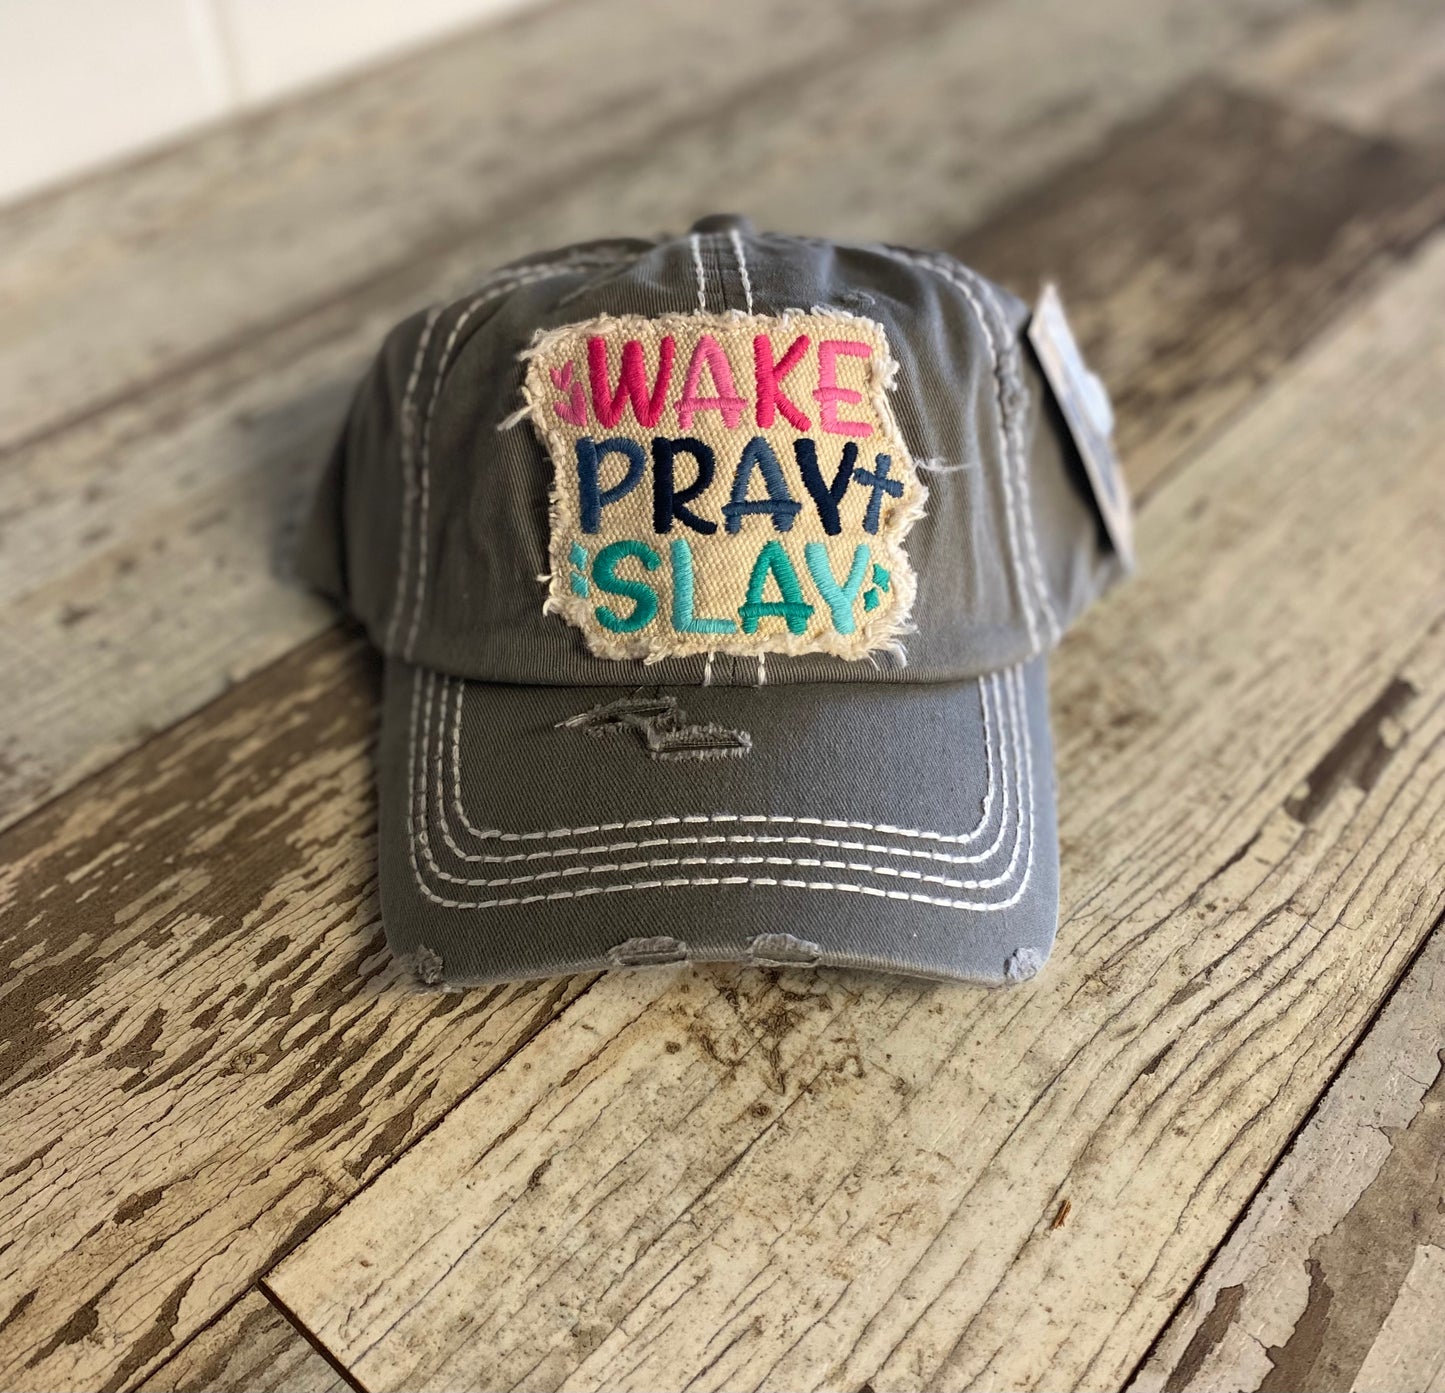 Wake Pray Slay Embroidery Patch Hat